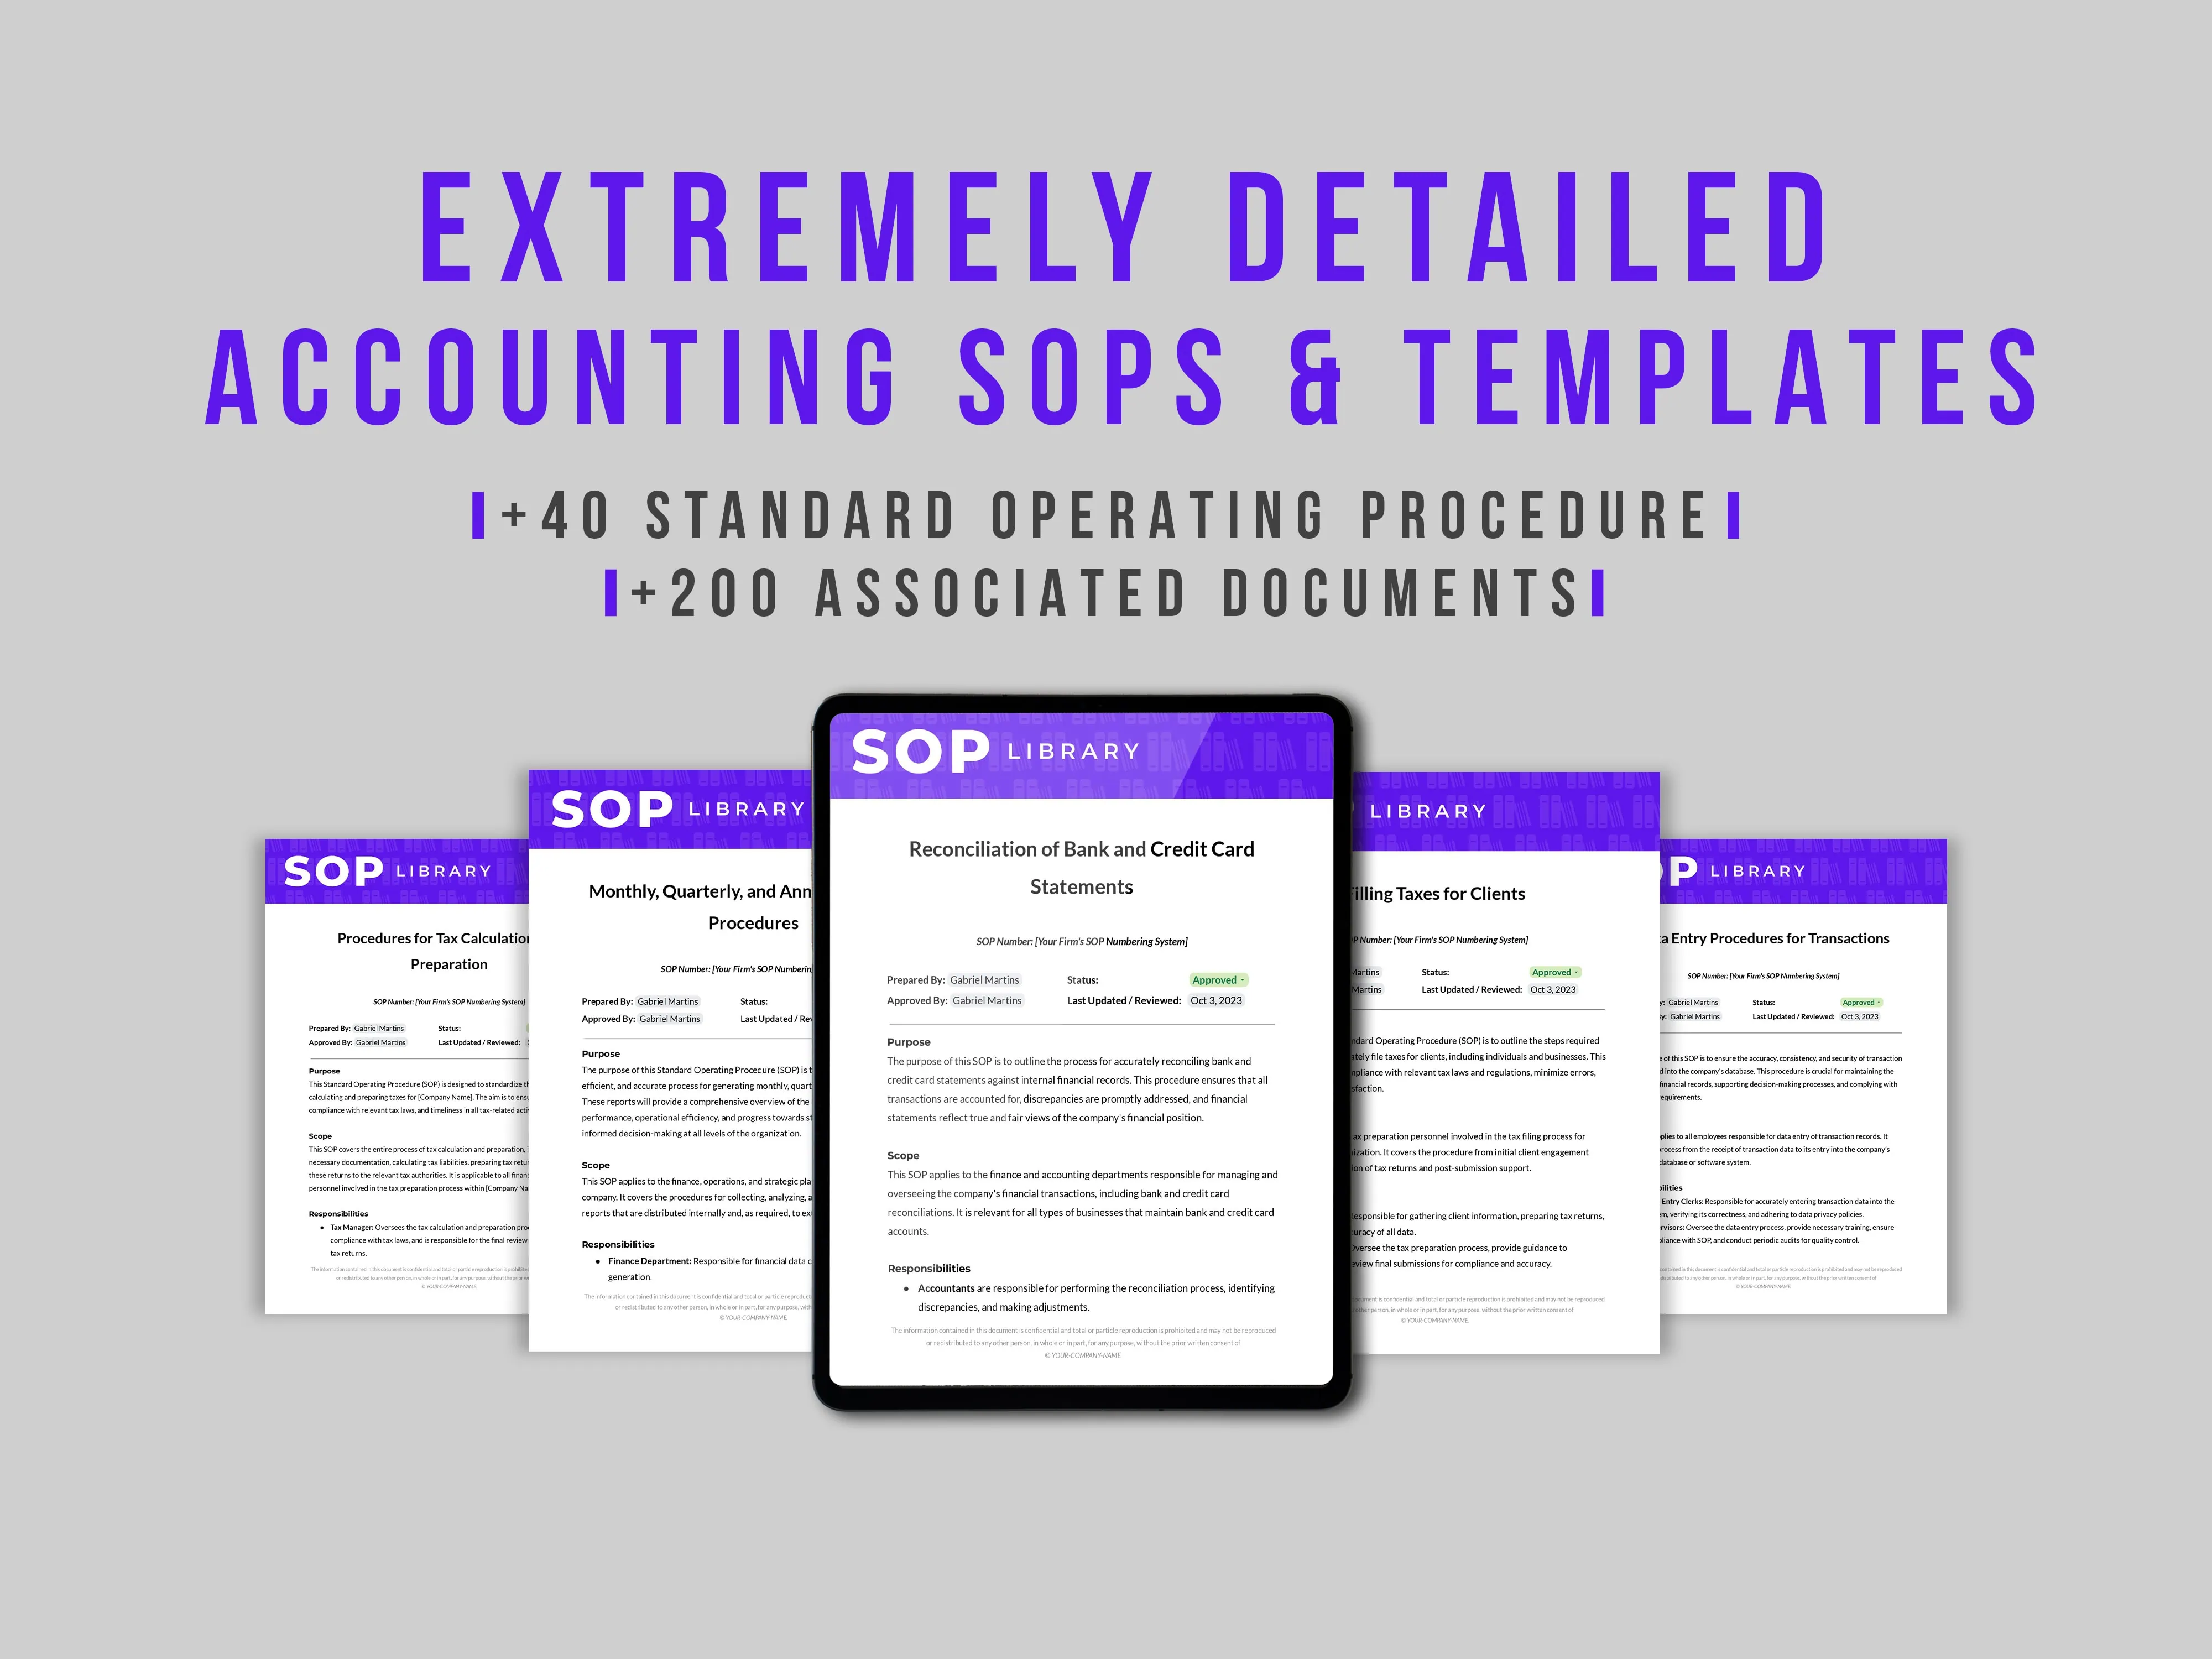 Accounting-Firms-SOPs-Toolkit-Image-02